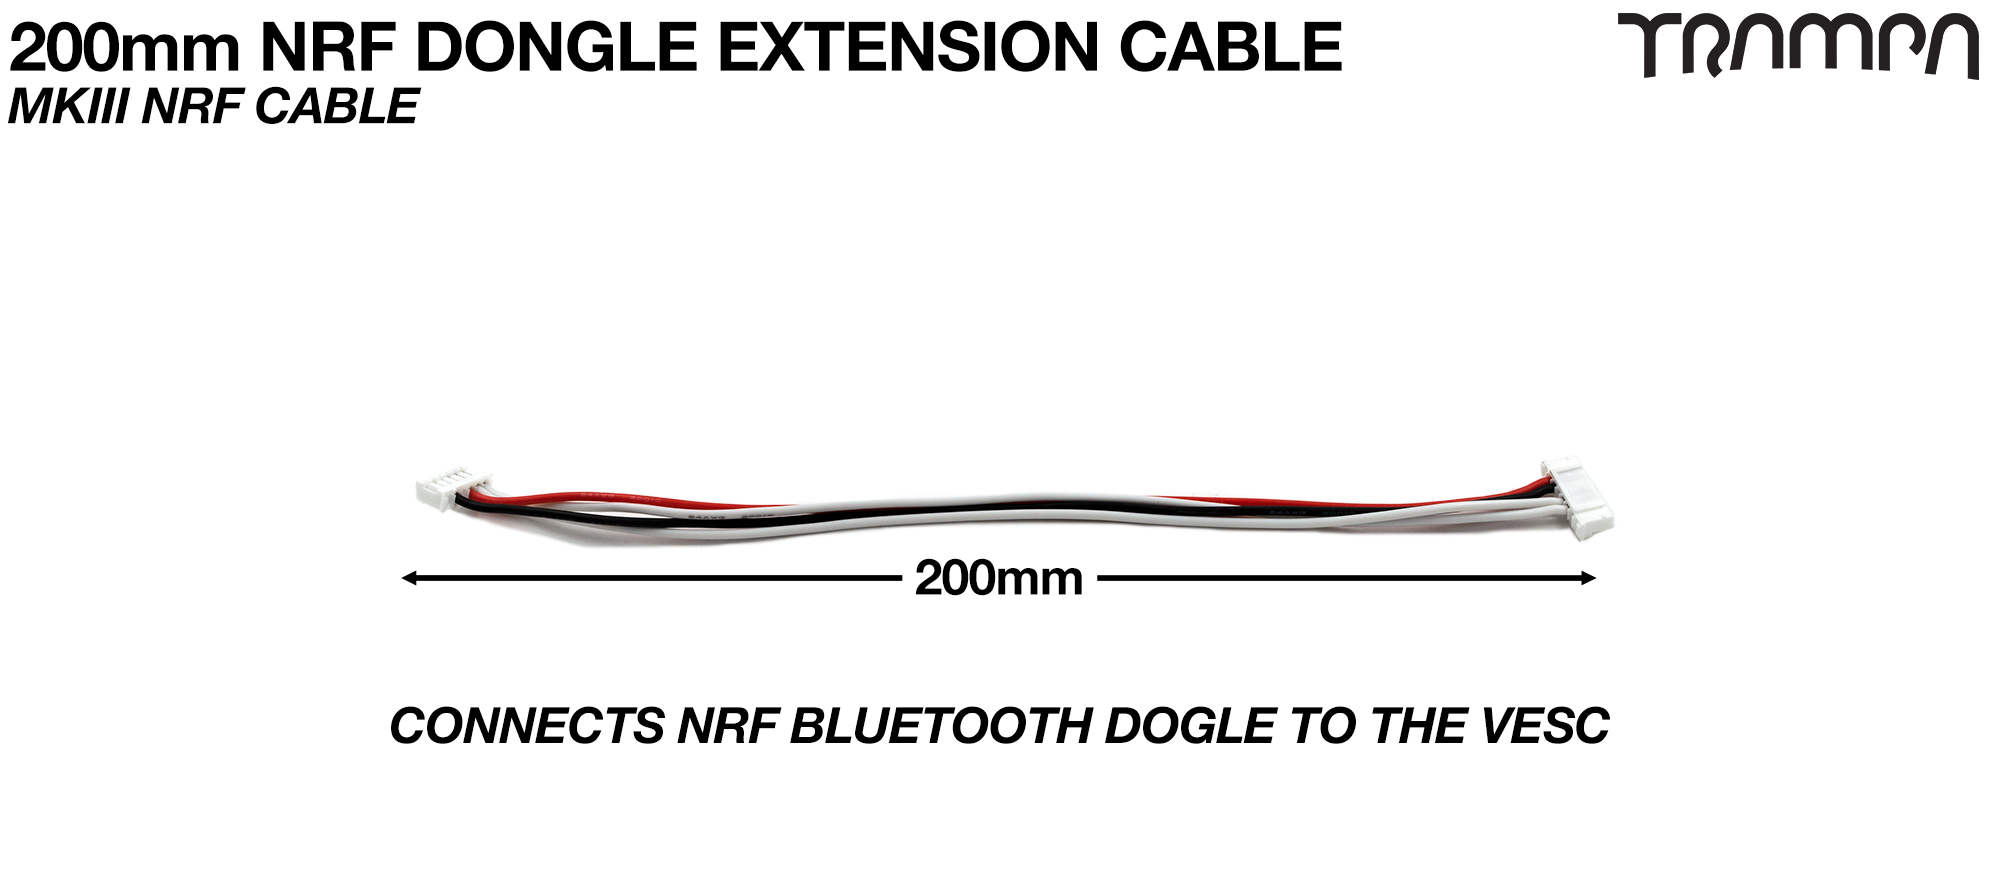 MKIII NRF Dongle Extender cable 200mm 